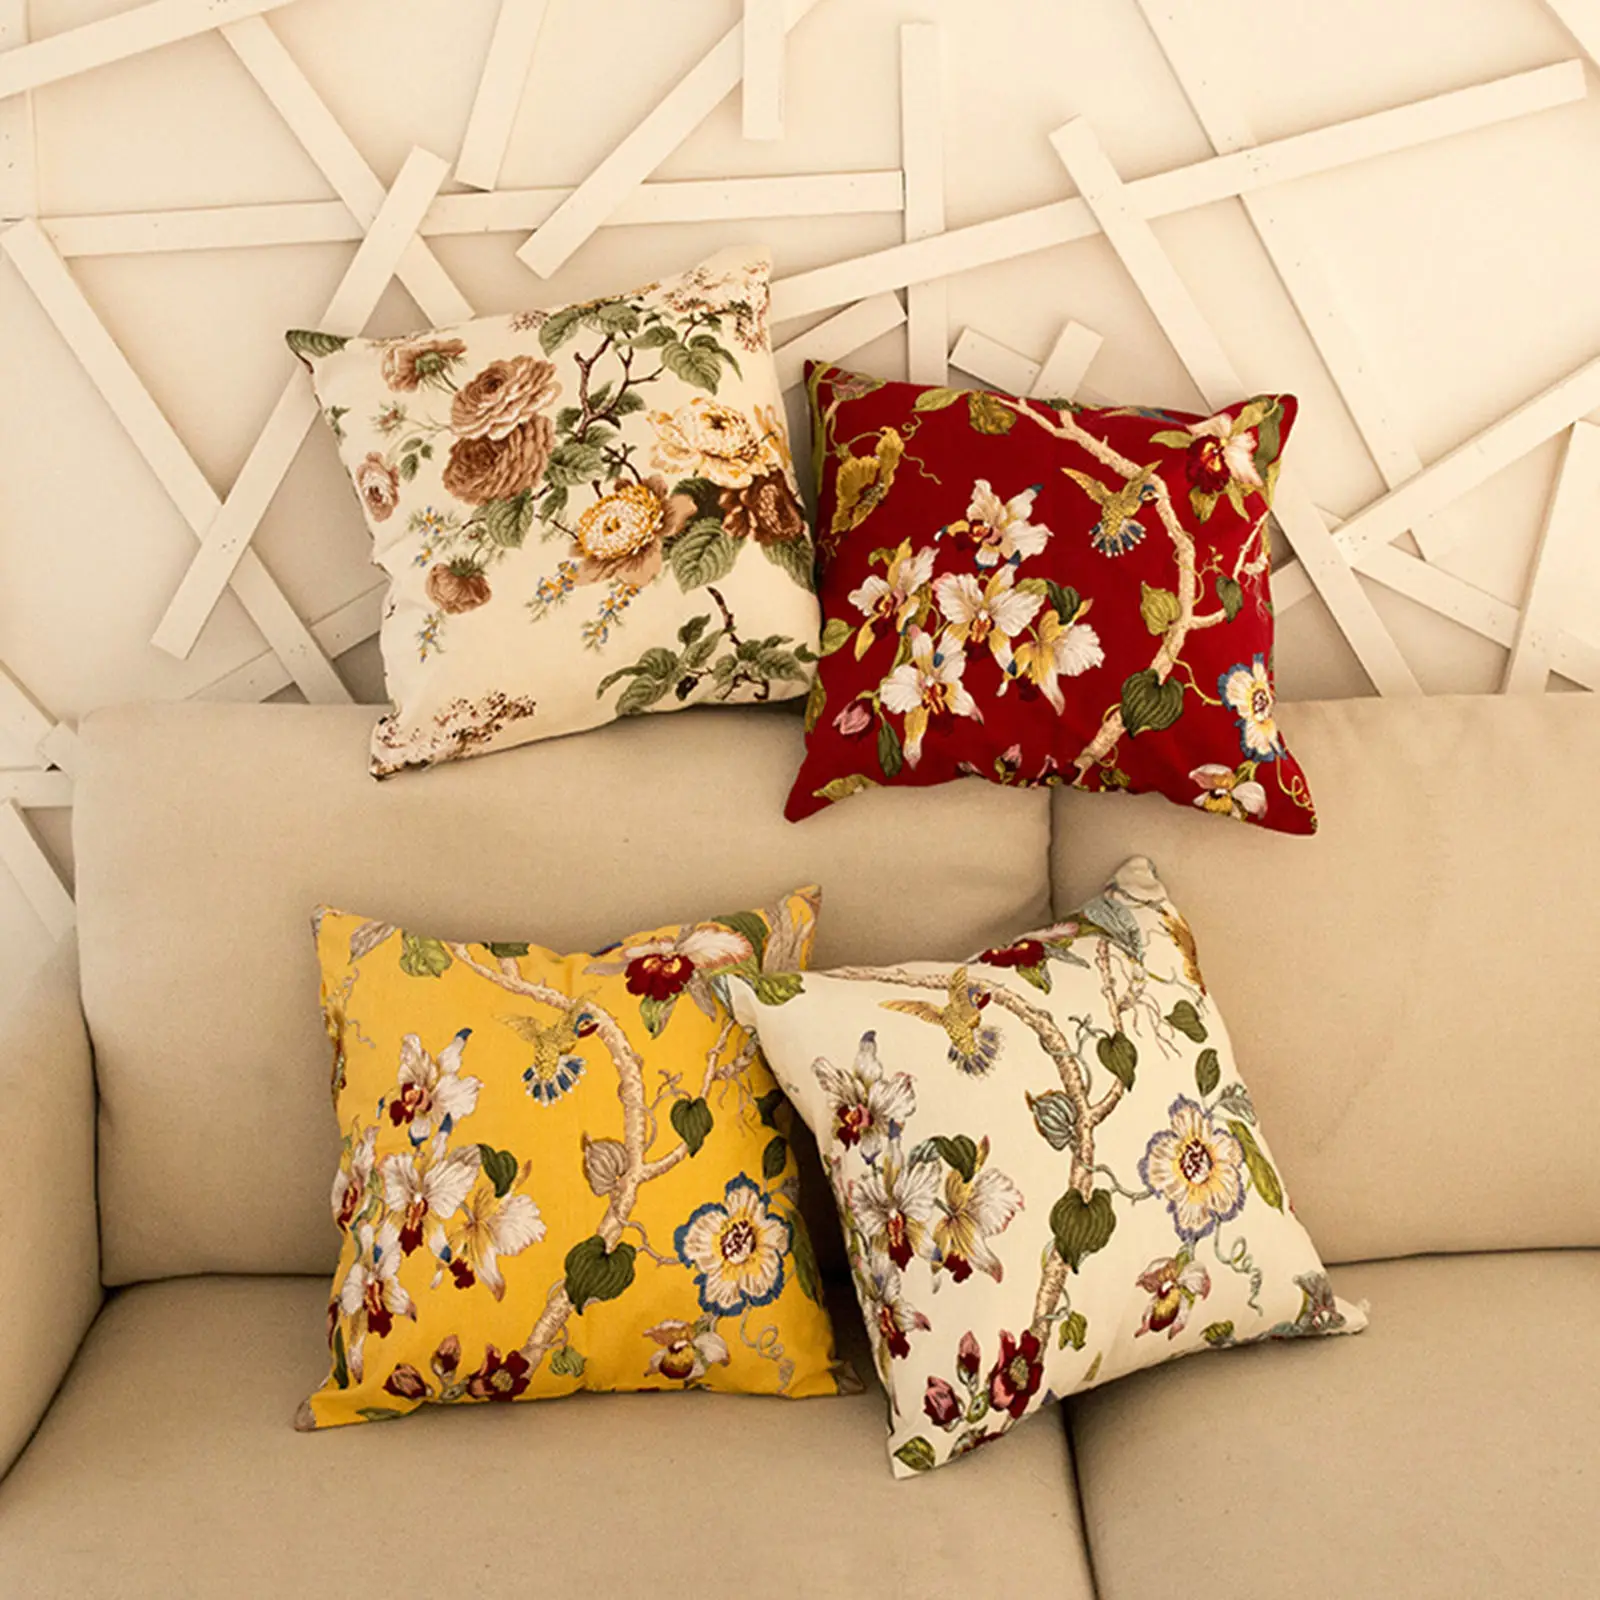 Floral Cushion Cover Flower Print Sofa Cotton Throw Pillow Cases Bedroom Home Decor Car Office Chair Decorative Accessories